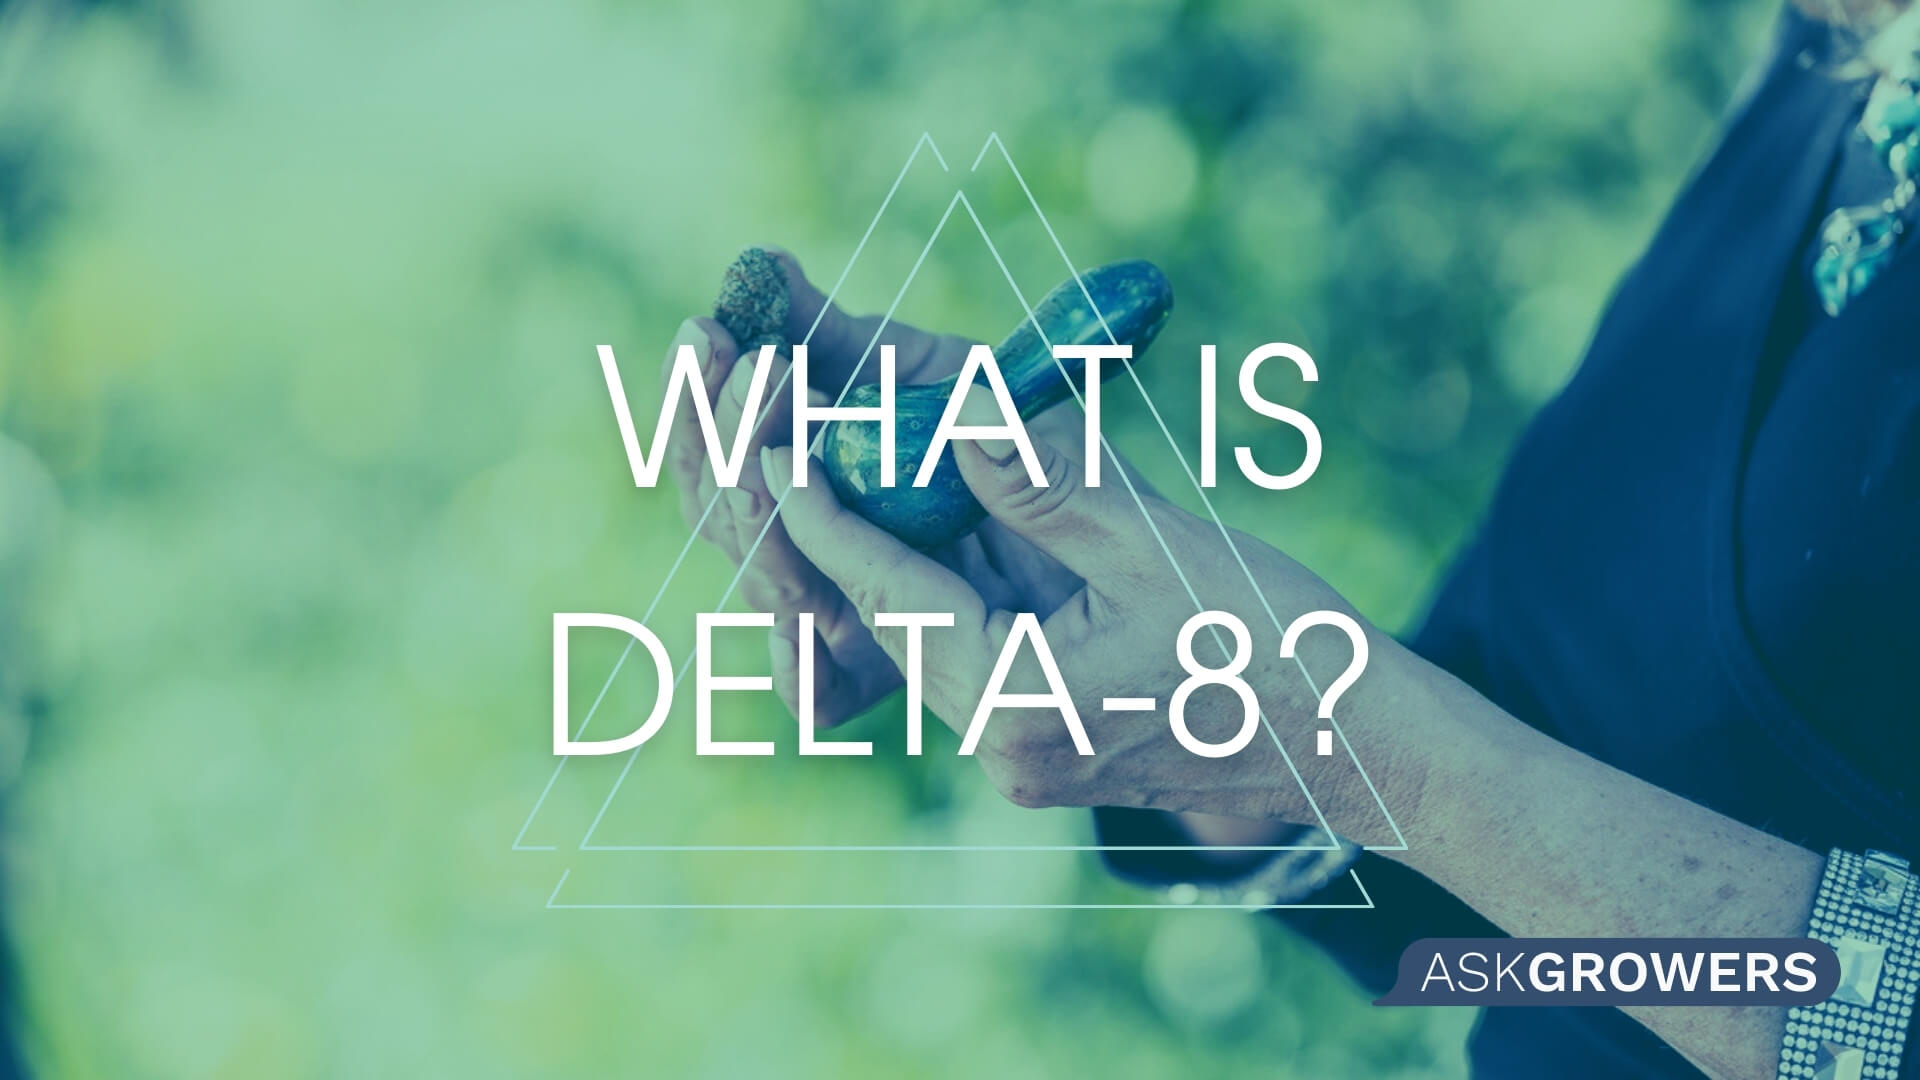 What Is Delta-8?